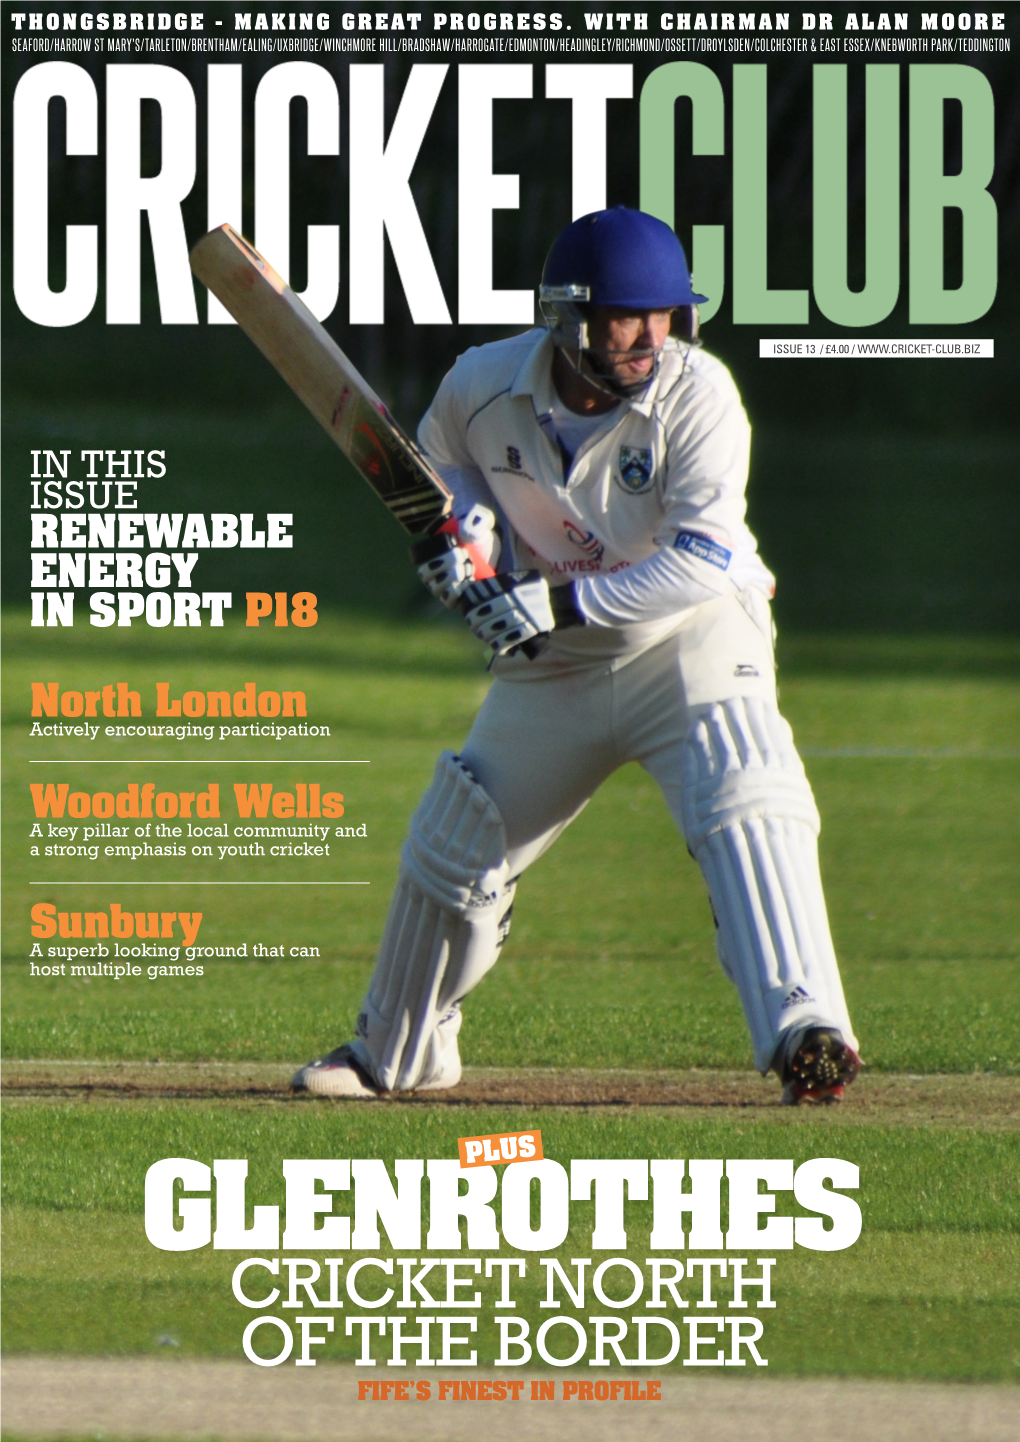 Glenrothes Cricket North of the Border Fife’S Finest in Profile Glenrothes